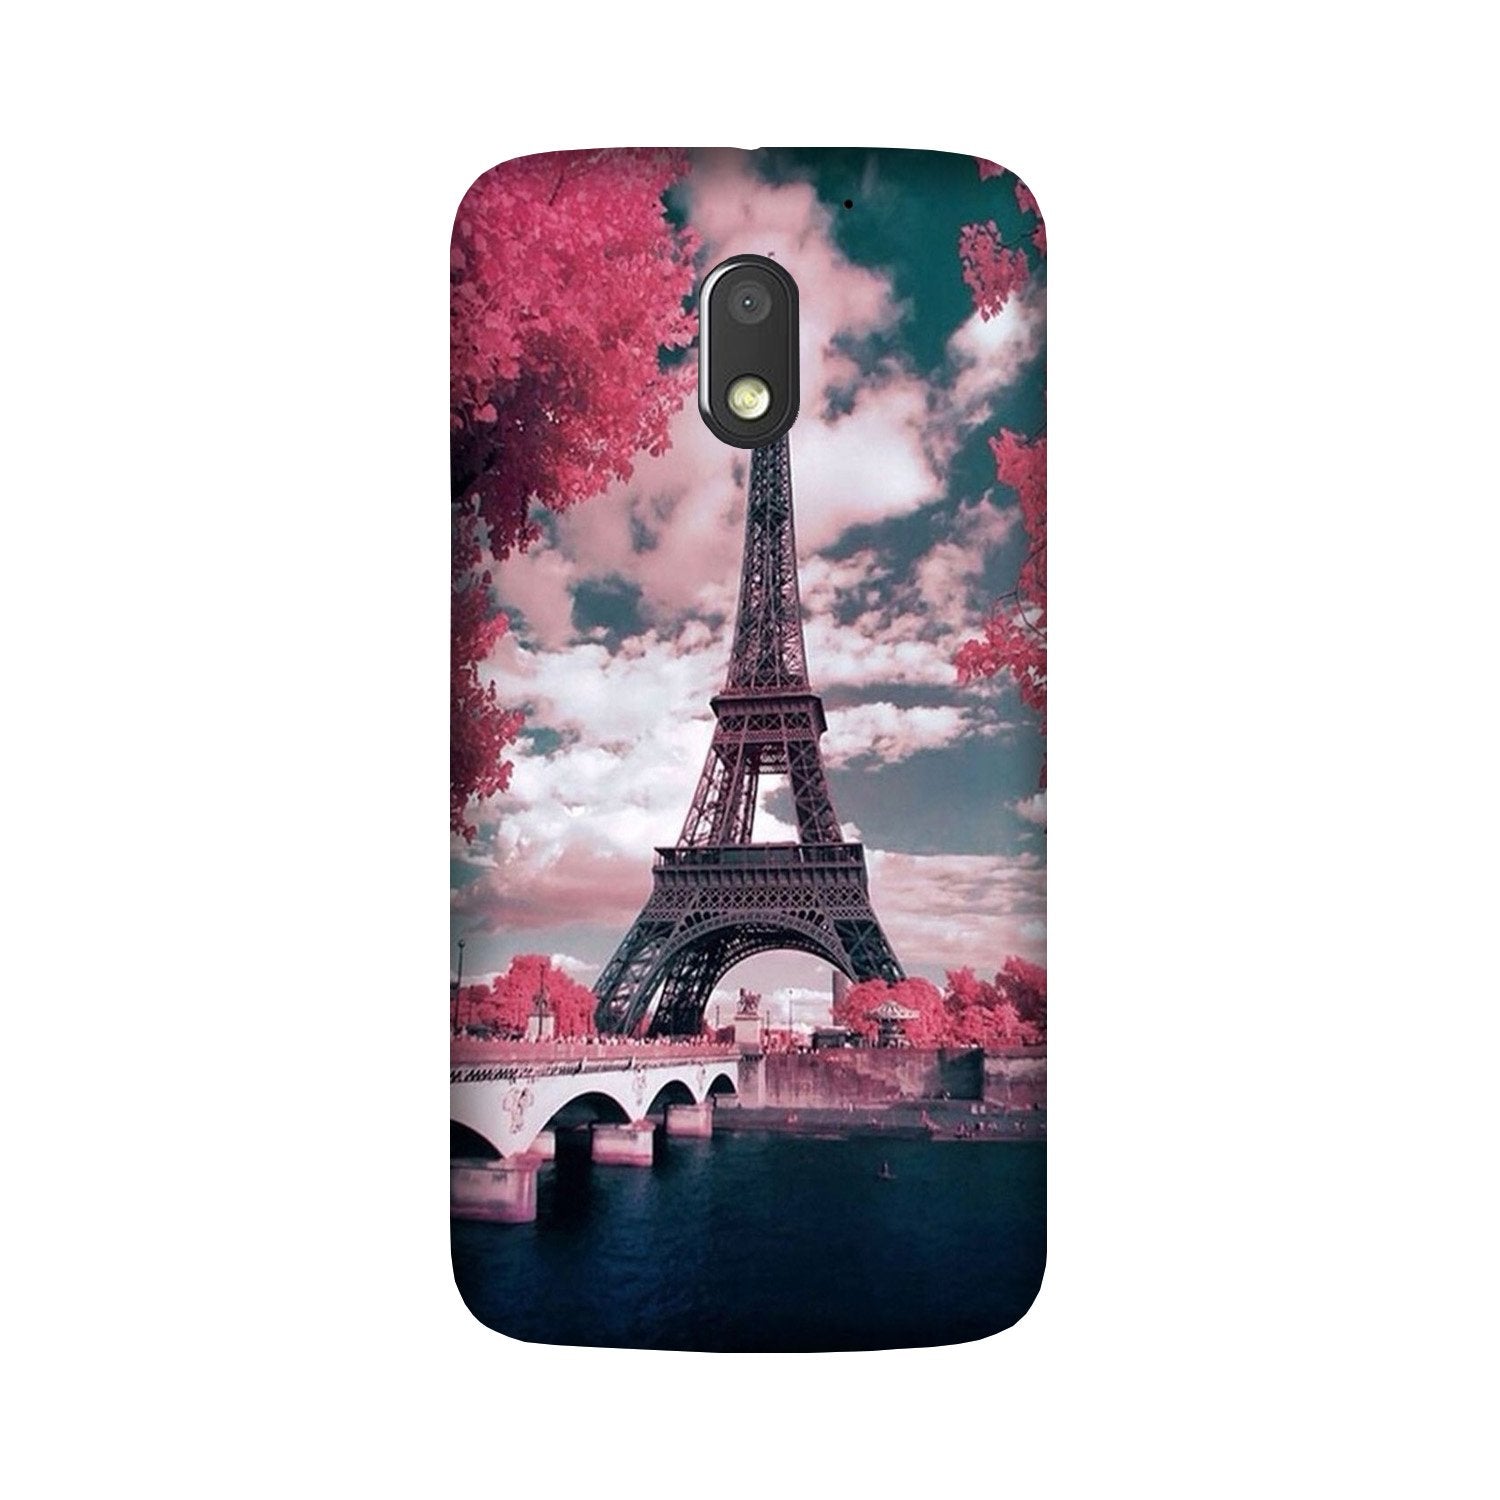 Eiffel Tower Case for Moto G4 Play(Design - 101)